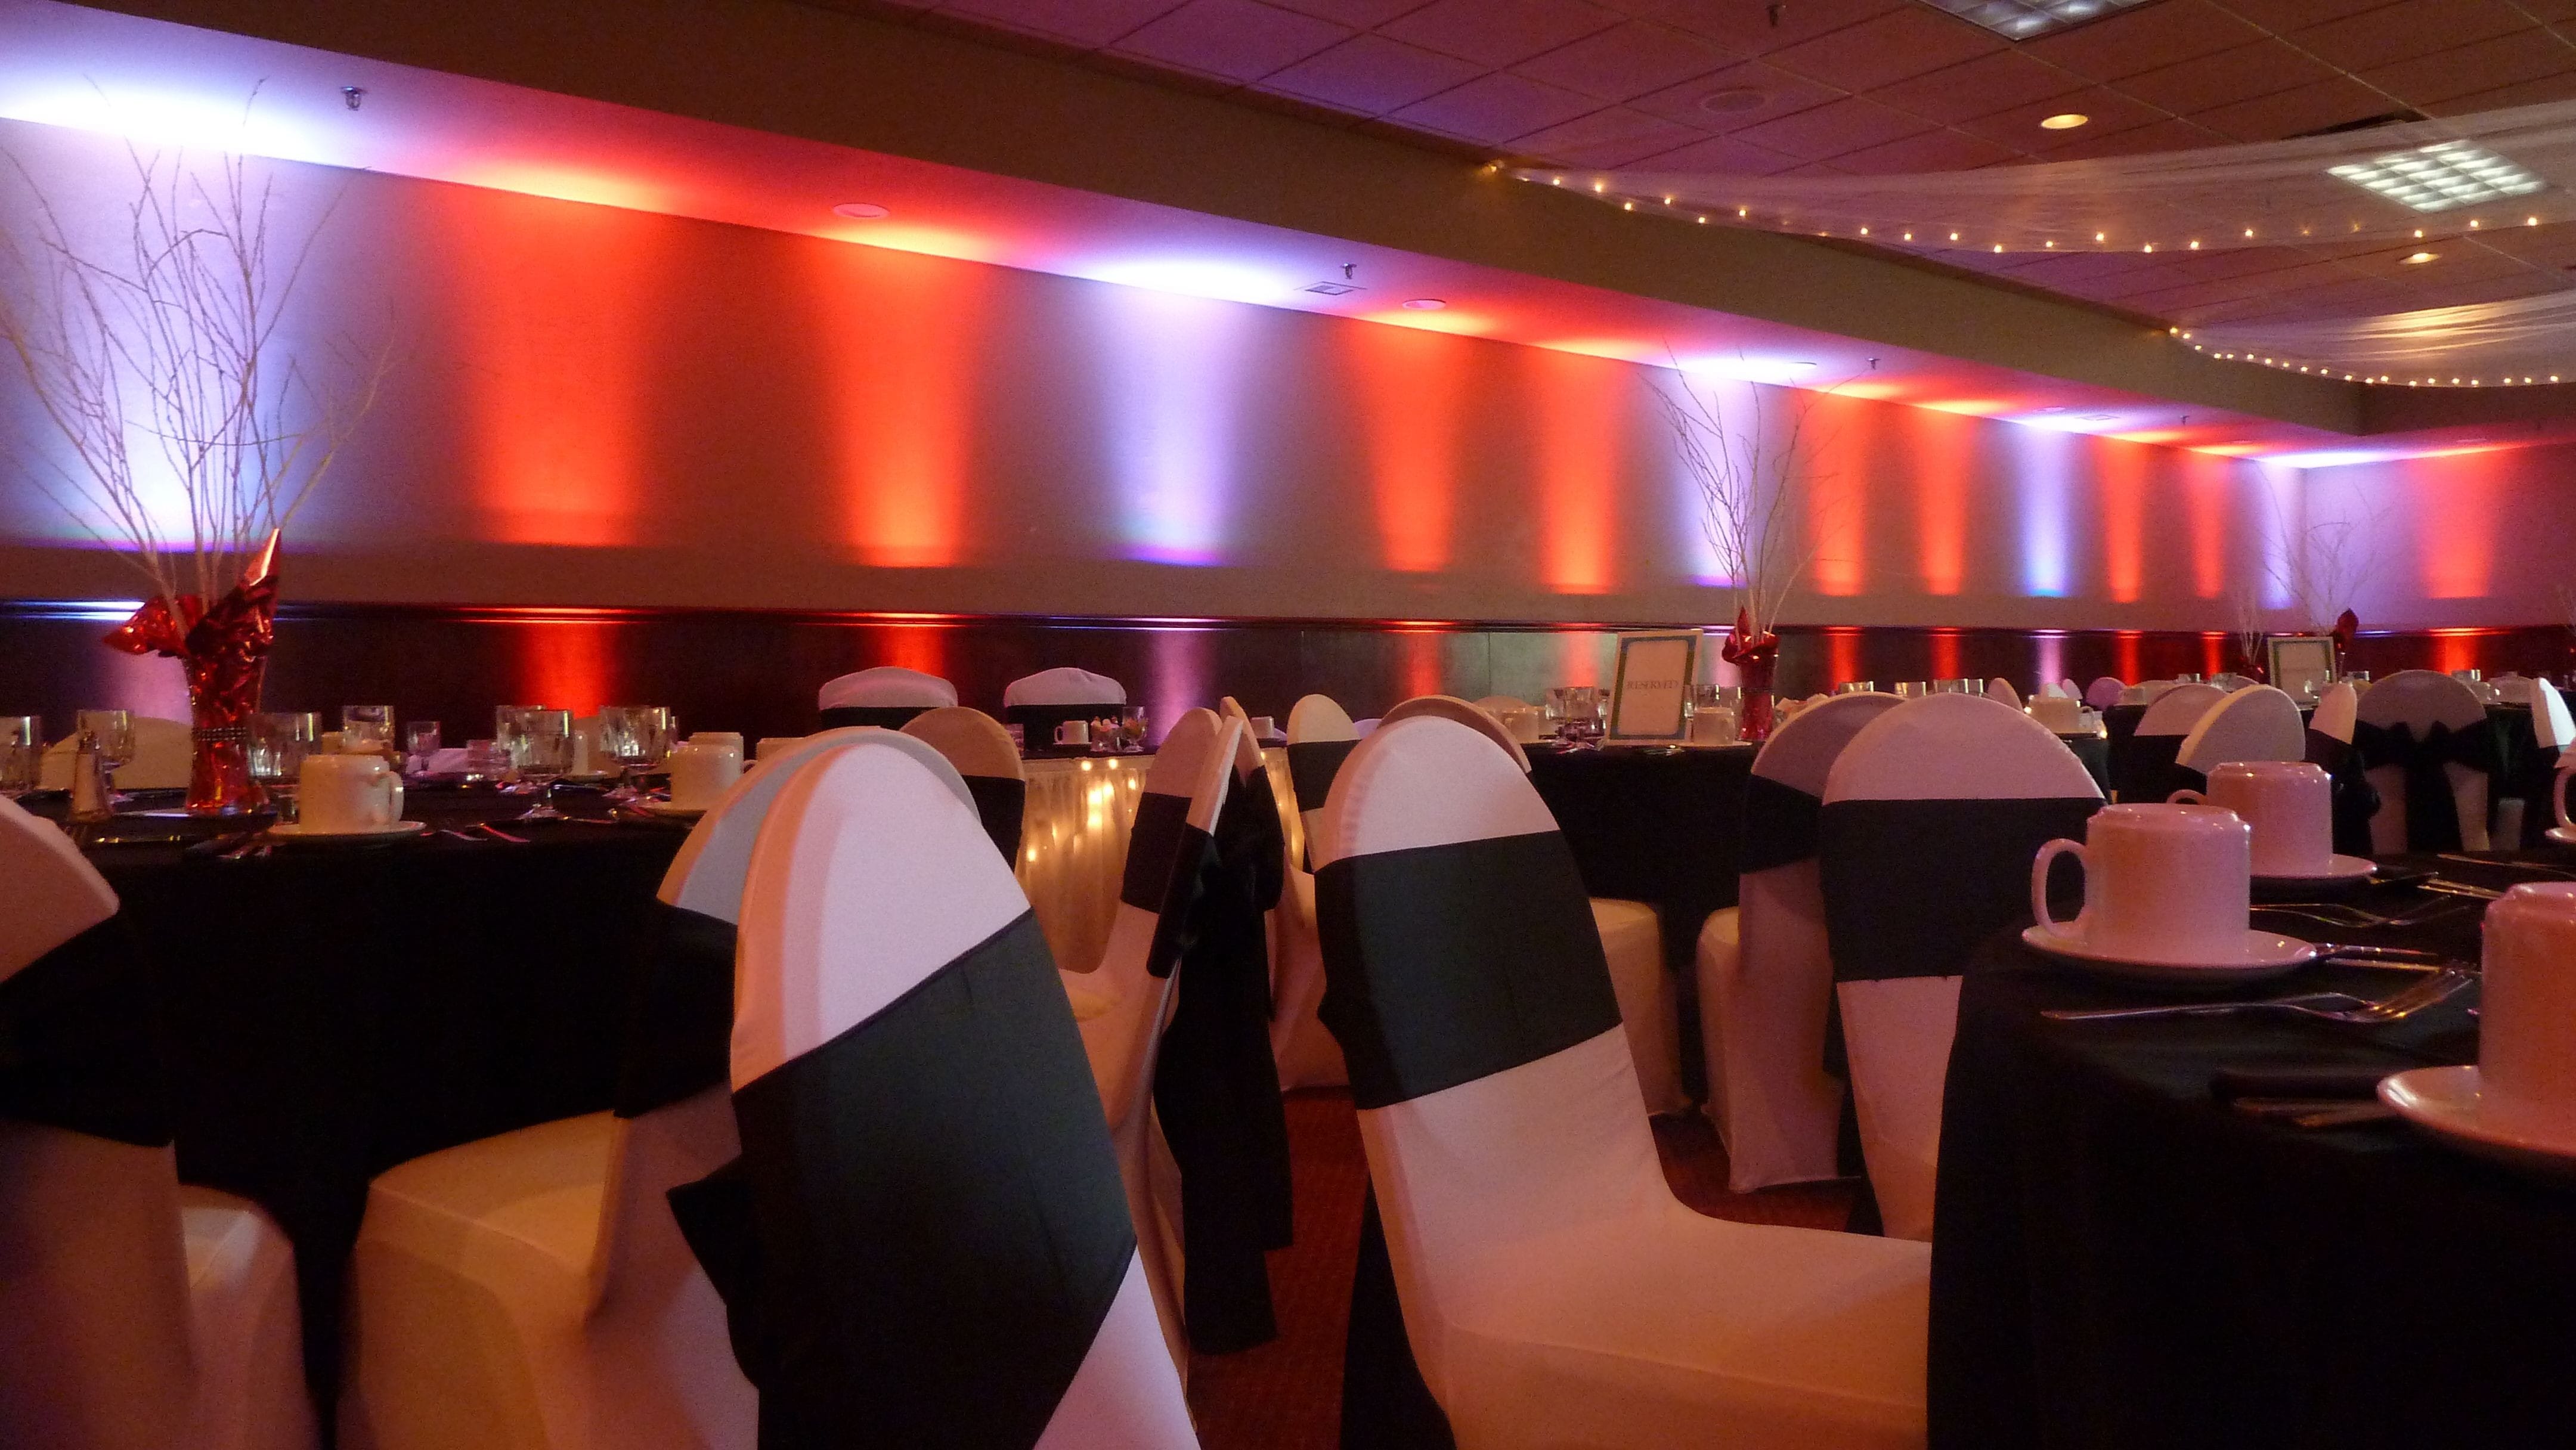 Wedding lighting at Blackwoods Event Center in Proctor. Up lighting in a dim red and cool white.